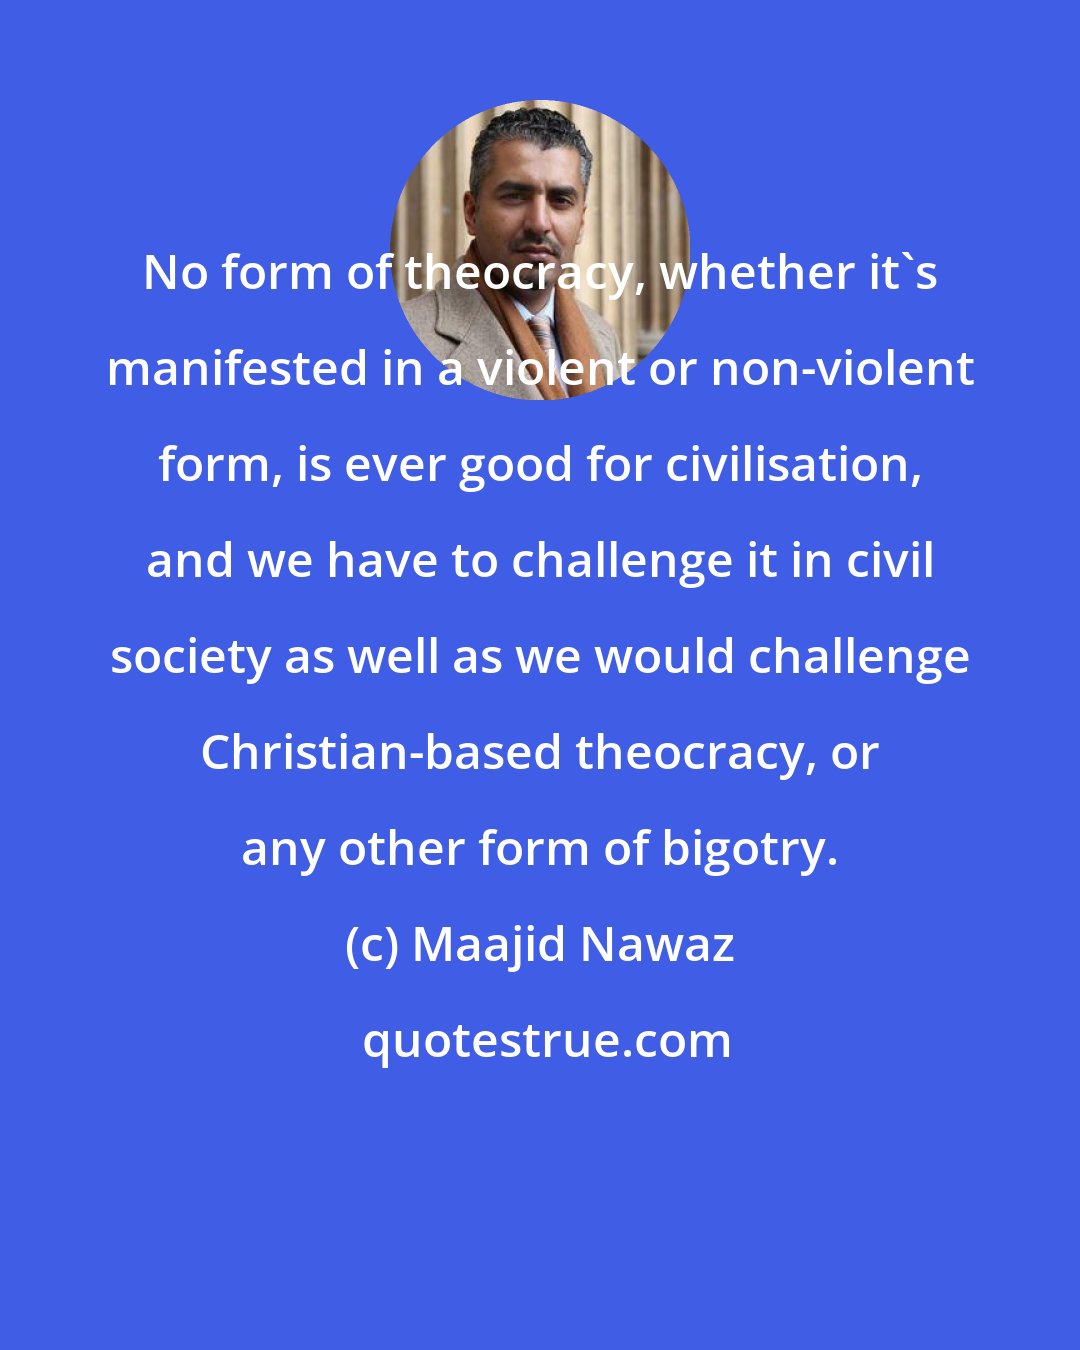 Maajid Nawaz: No form of theocracy, whether it's manifested in a violent or non-violent form, is ever good for civilisation, and we have to challenge it in civil society as well as we would challenge Christian-based theocracy, or any other form of bigotry.